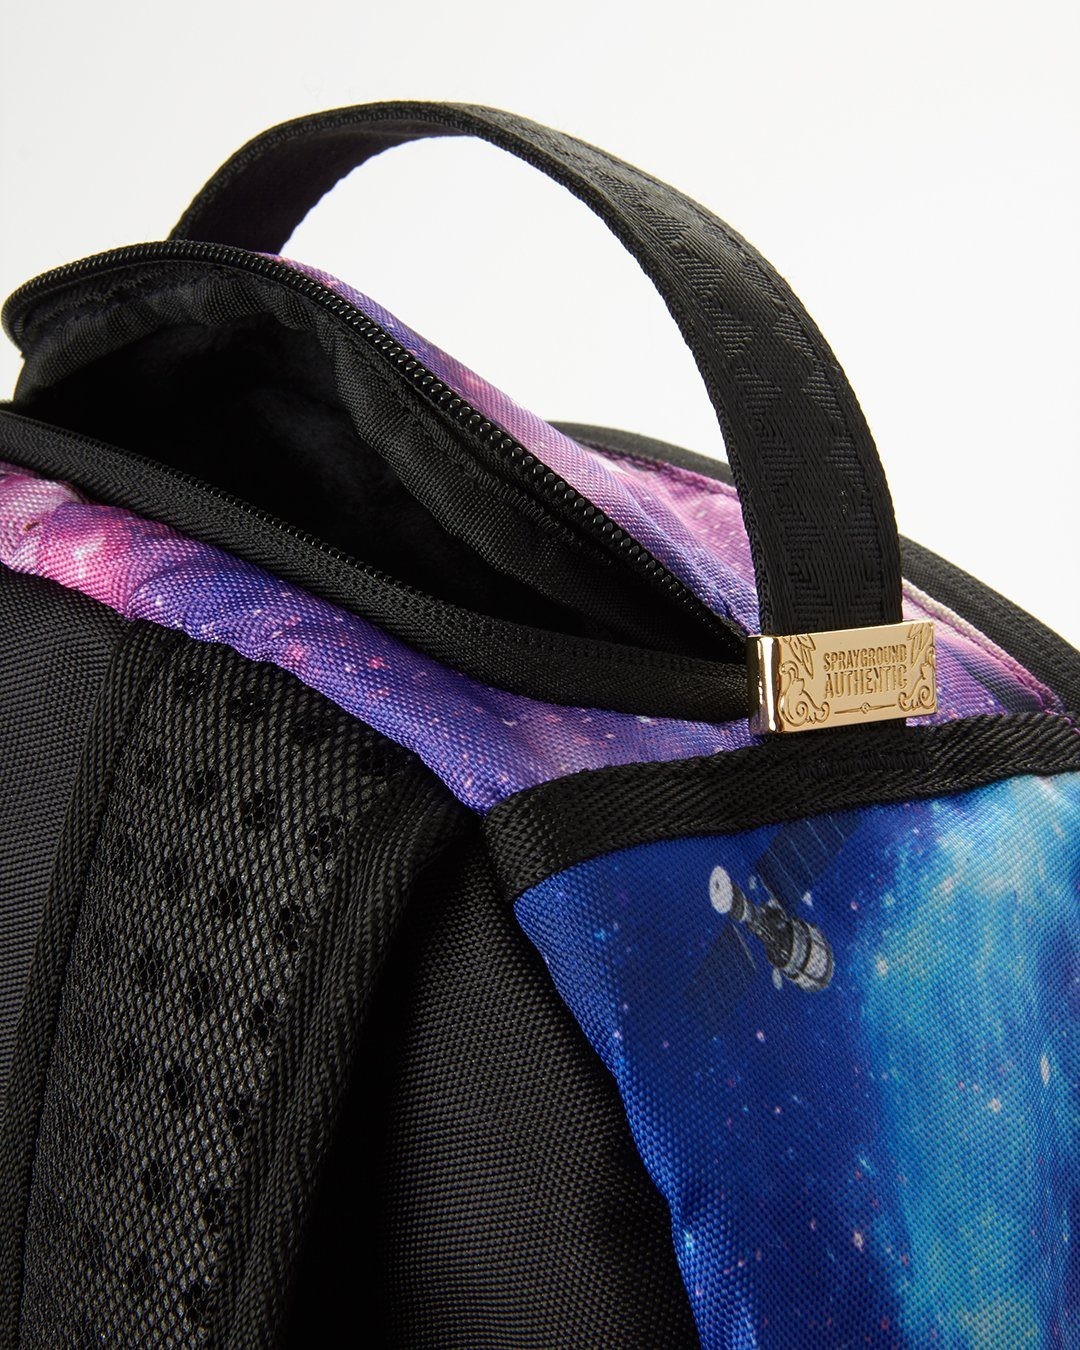 Discount | Spaced Out Backpack Sprayground Sale - Discount | Spaced Out Backpack Sprayground Sale-01-6